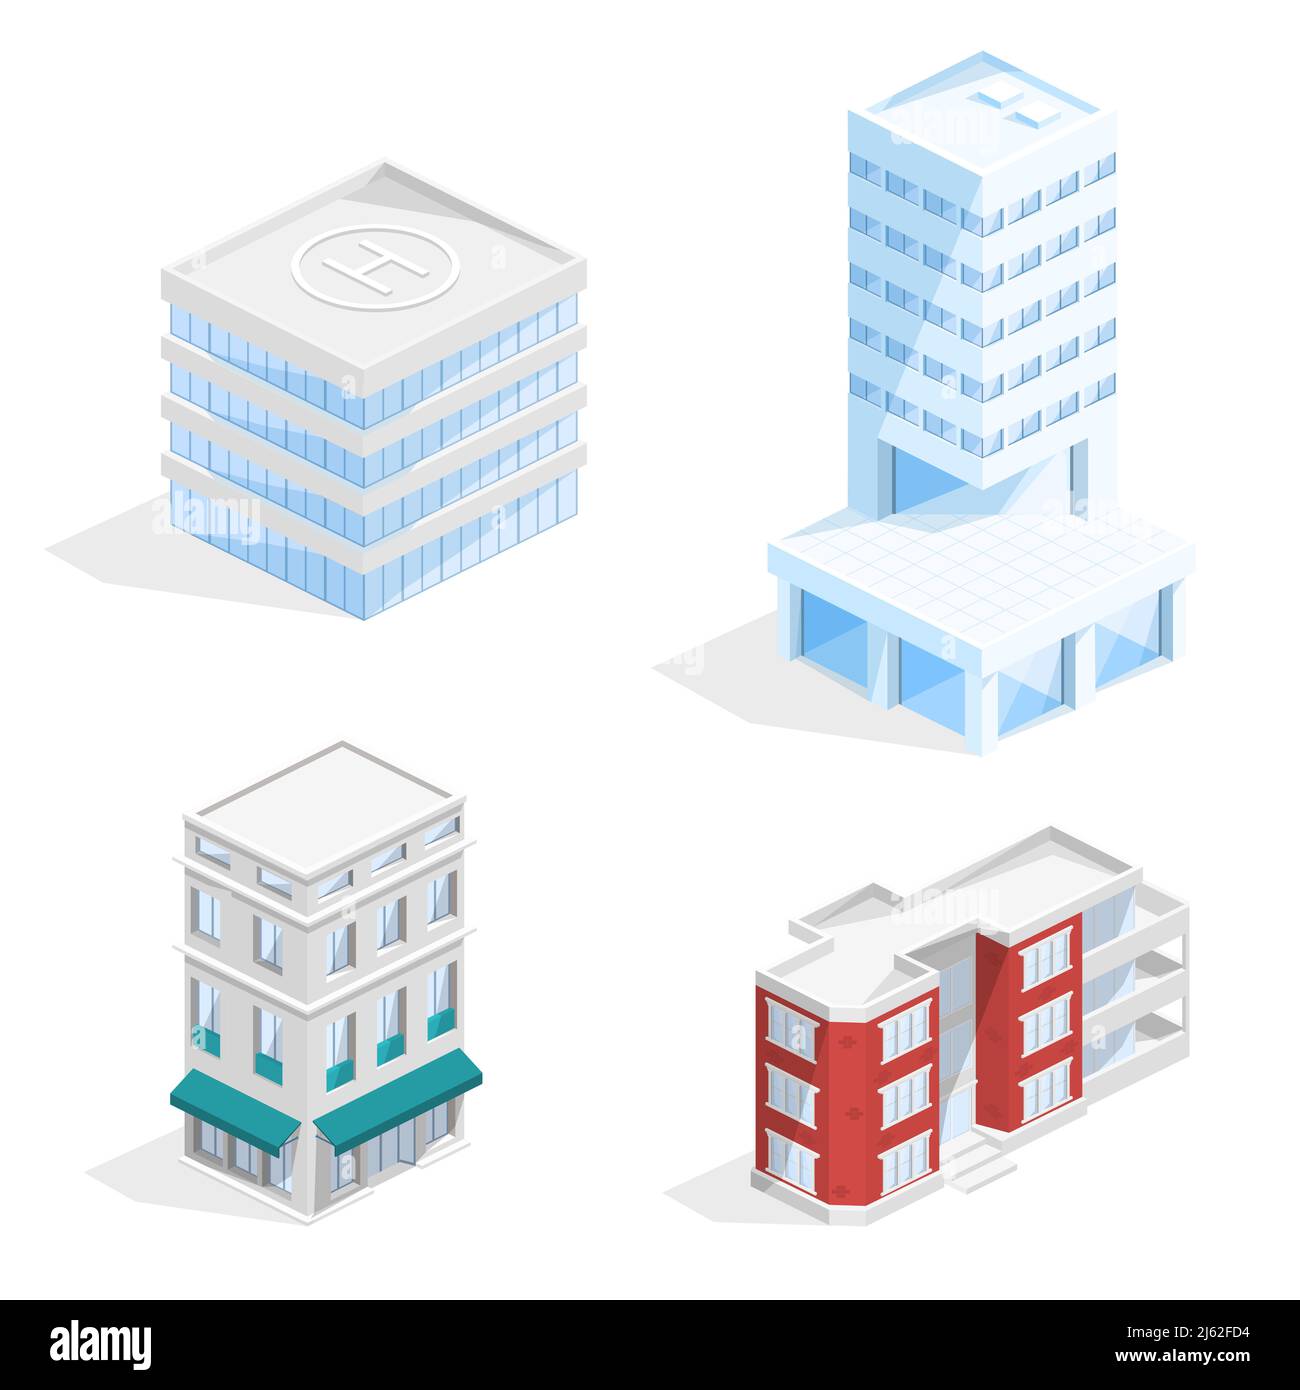 City buildings vector illustration of isometric residential houses and business center offices, houses with balcony and helicopter platform or helipad Stock Vector